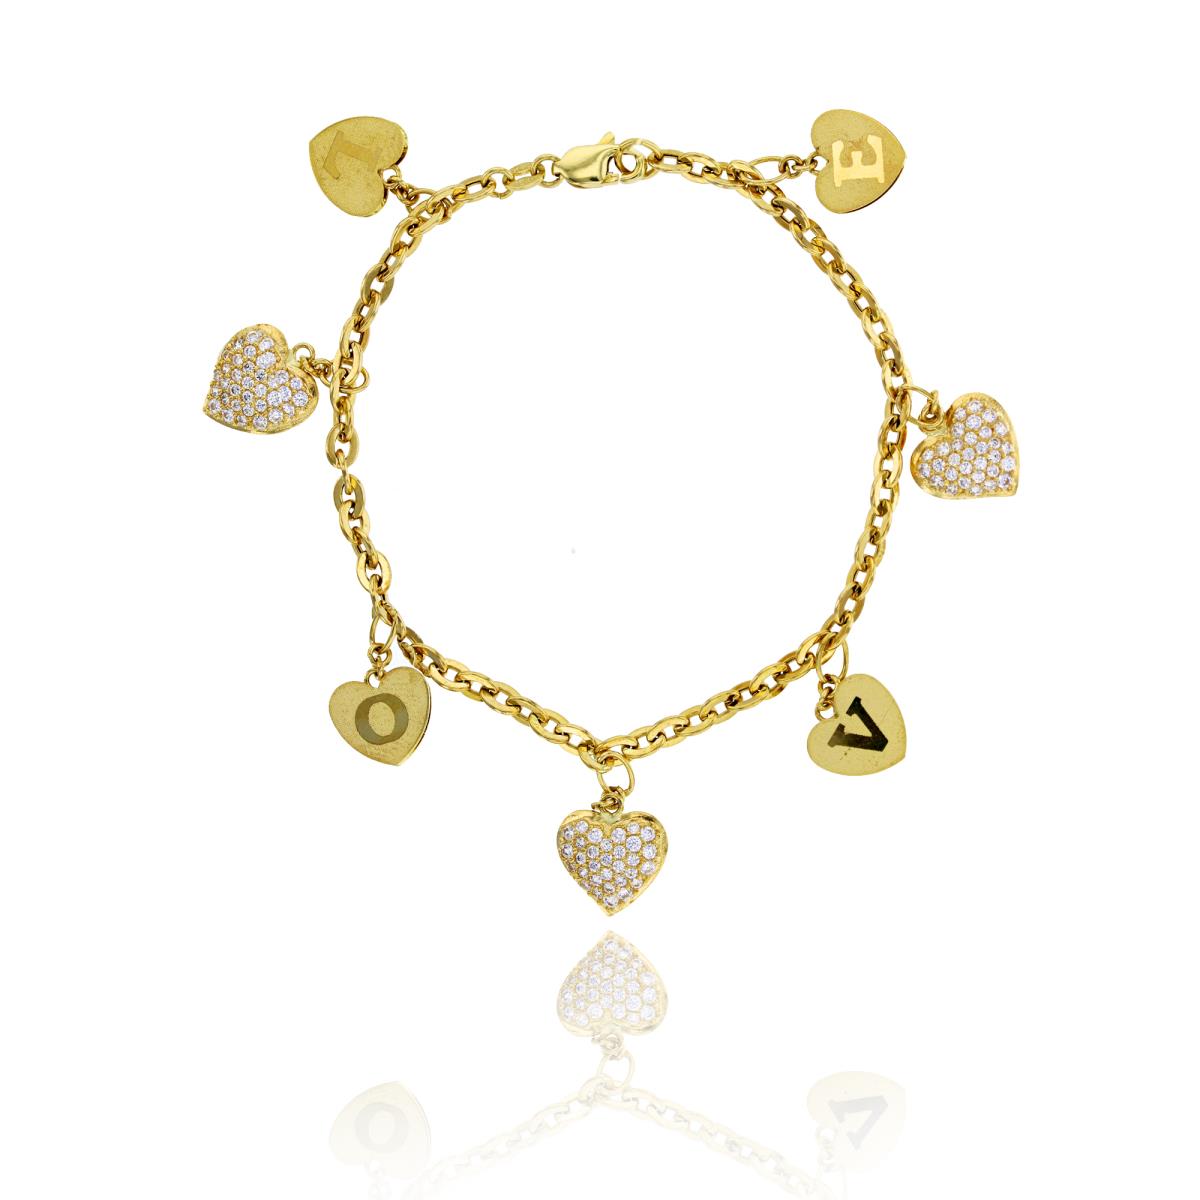 10K Yellow Gold LOVE Heart Charm 7.25" Bracelet with Cubic Zirconia